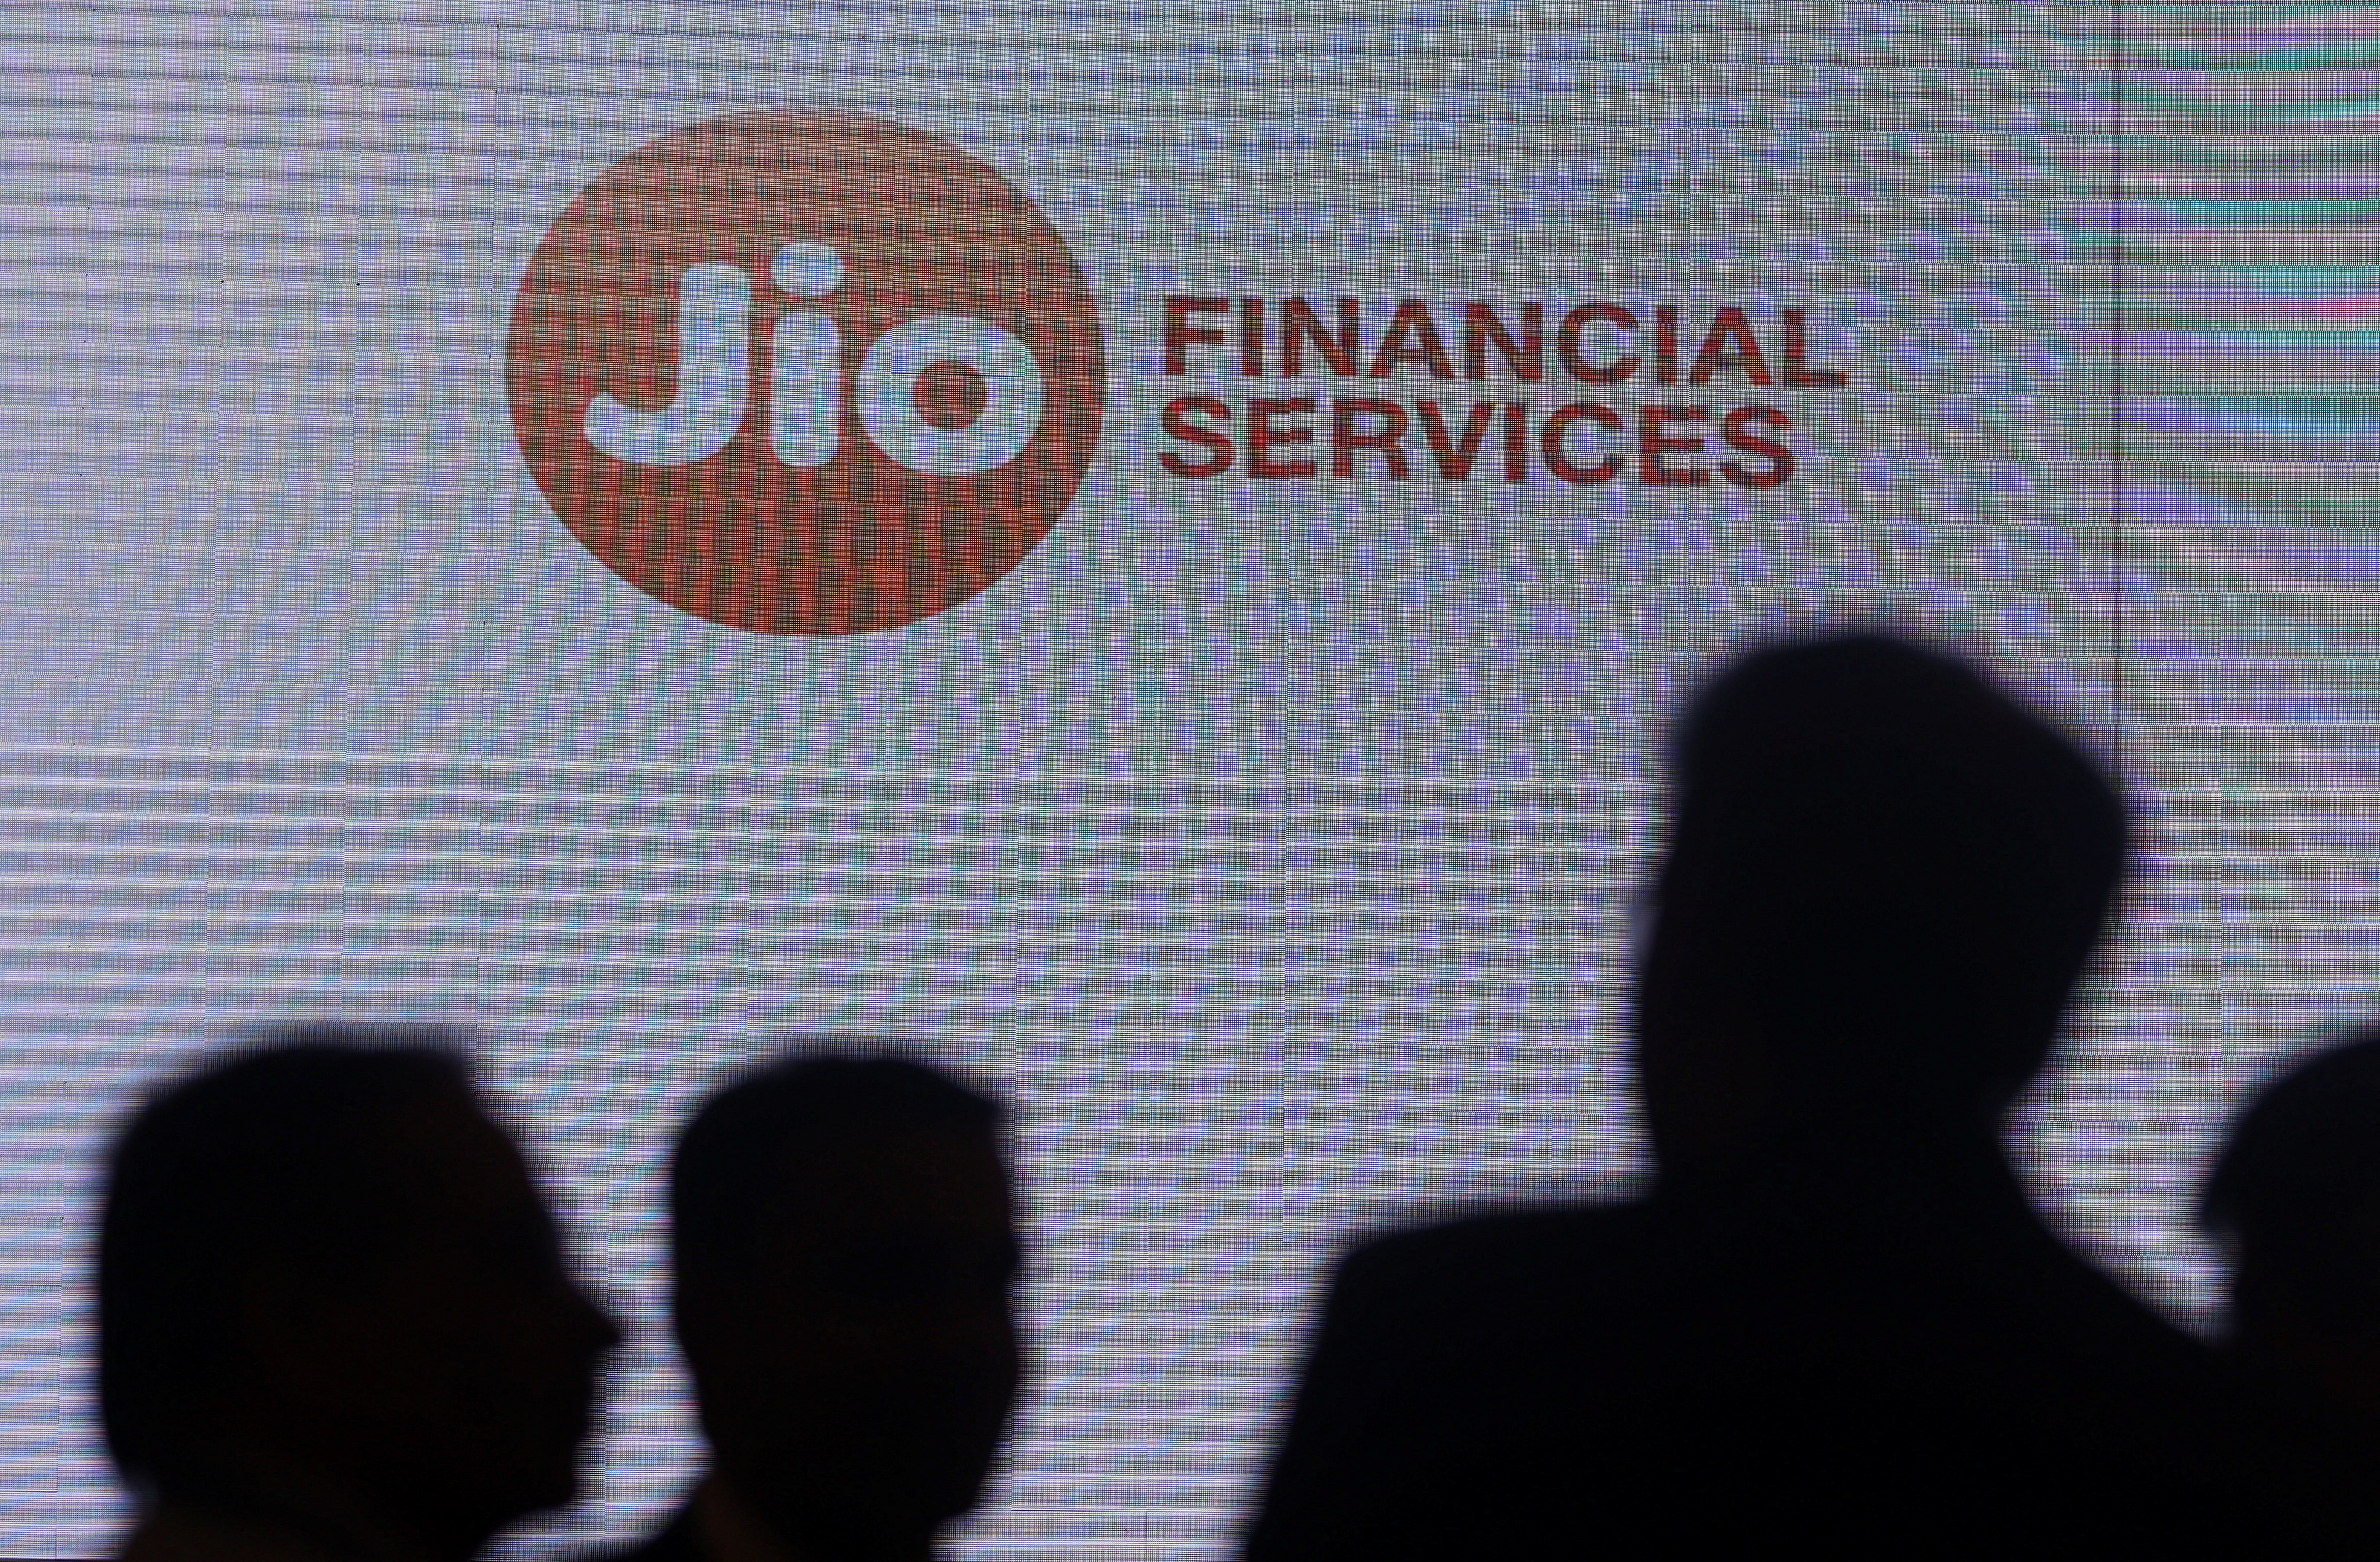 People stand next to a logo of Jio Financial Services ahead of its listing ceremony at the Bombay Stock Exchange in Mumbai